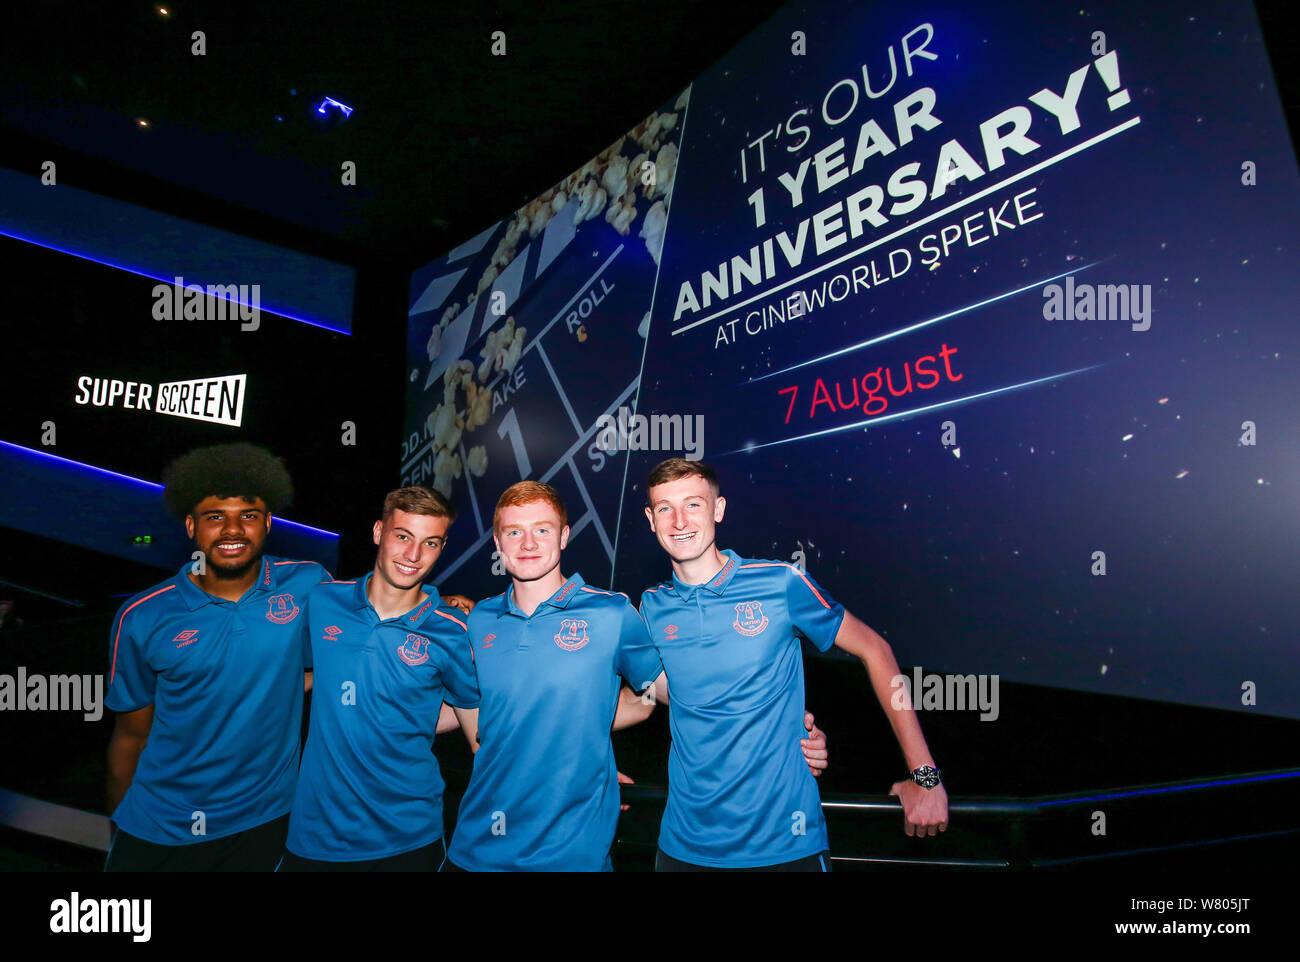 Everton U23 players Ellis Simms, Joe Anderson, Ryan Astley and captain Morgan Feeney pose for a picture during the Cineworld Speke Anniversary and Everton in the Community Screening in Liverpool. Stock Photo